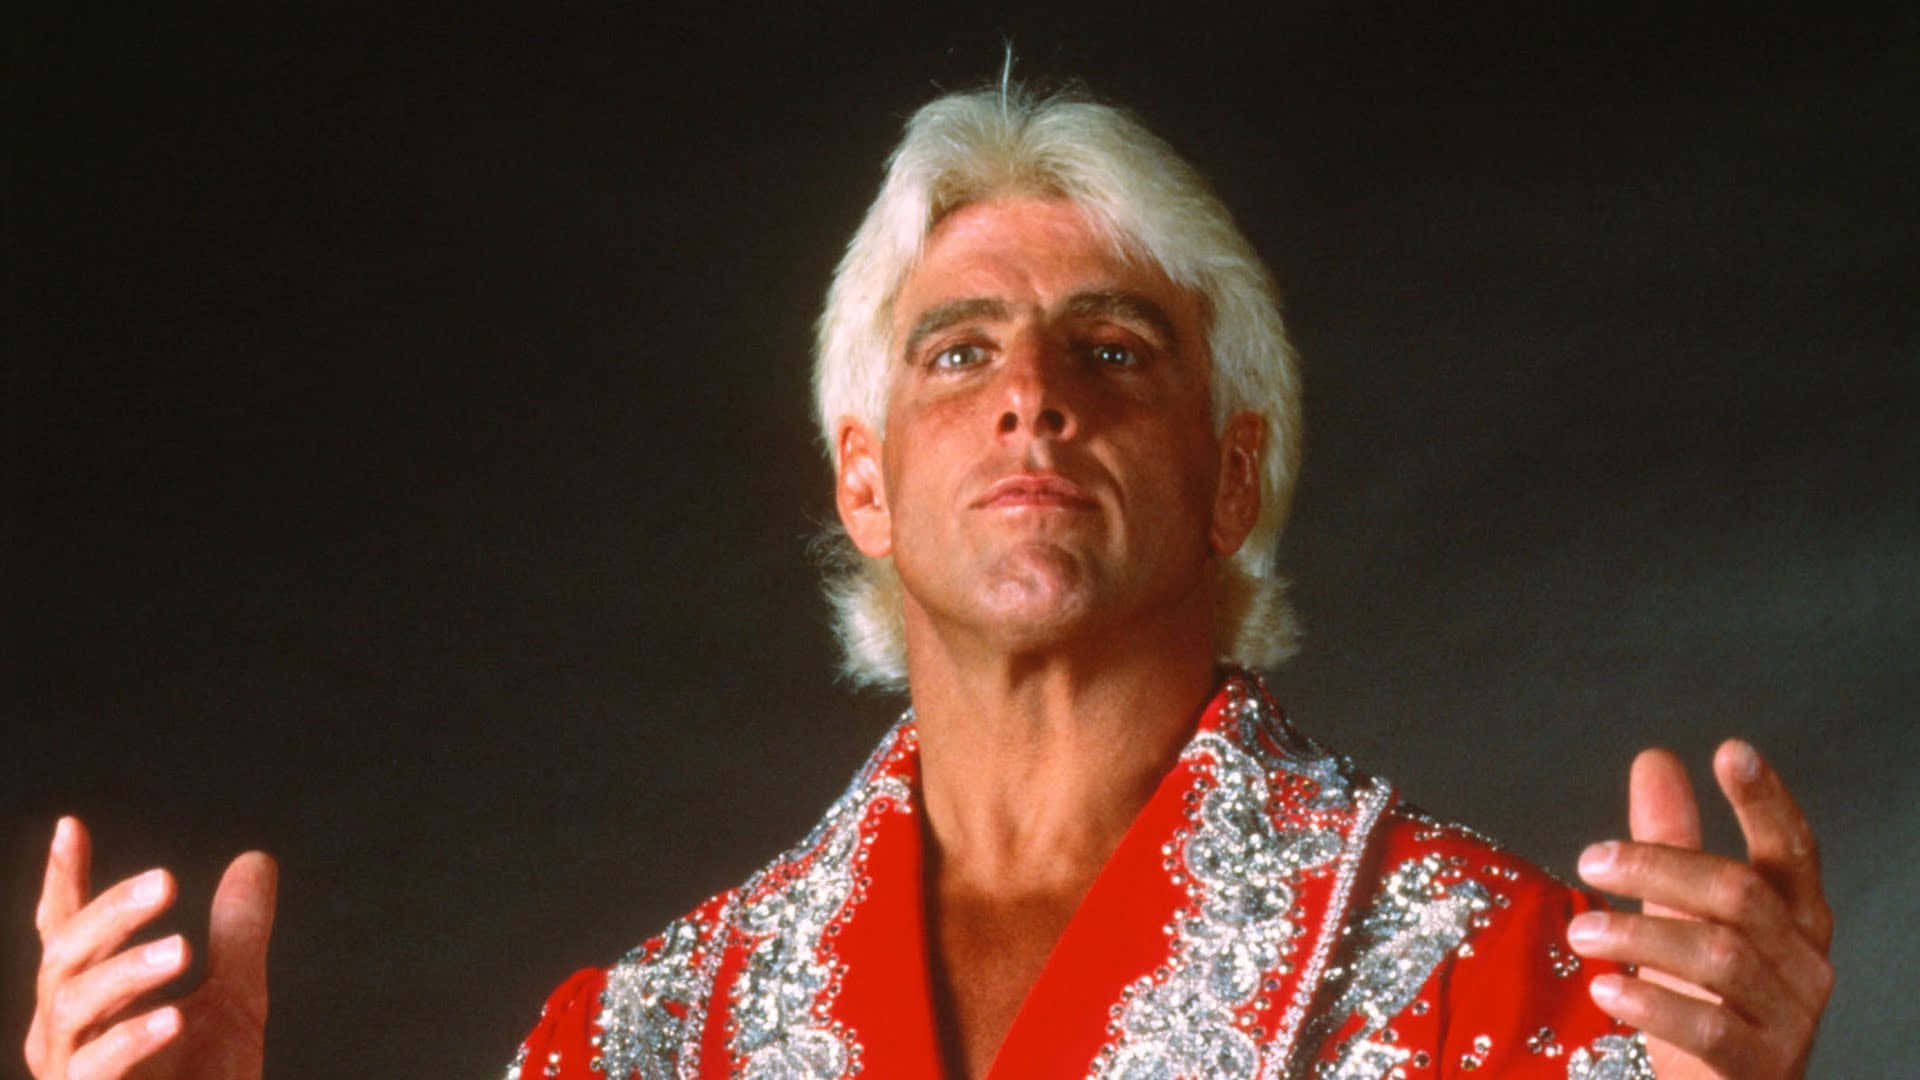 Ric Flair Wearing Red And Silver Robe Background